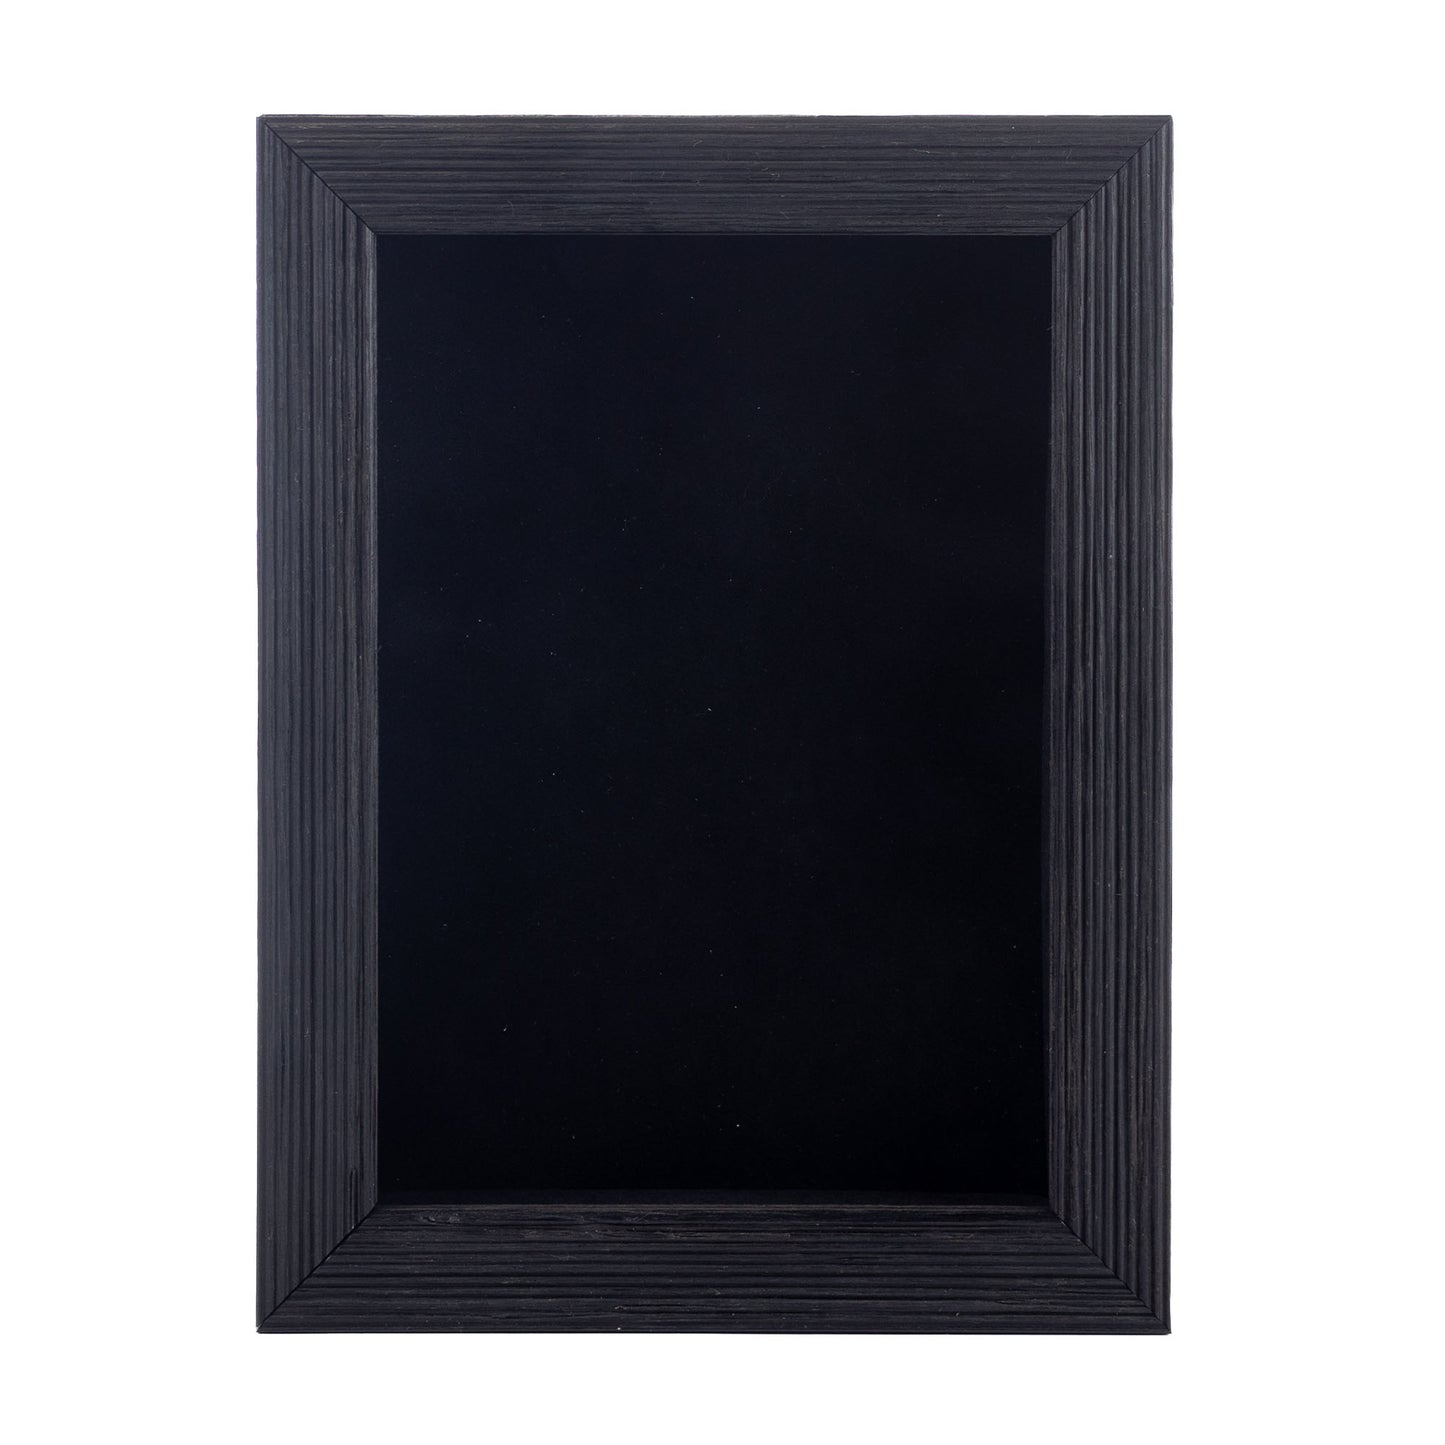 Distressed Black Shadow Box Frame With Black Acid-Free Suede Backing